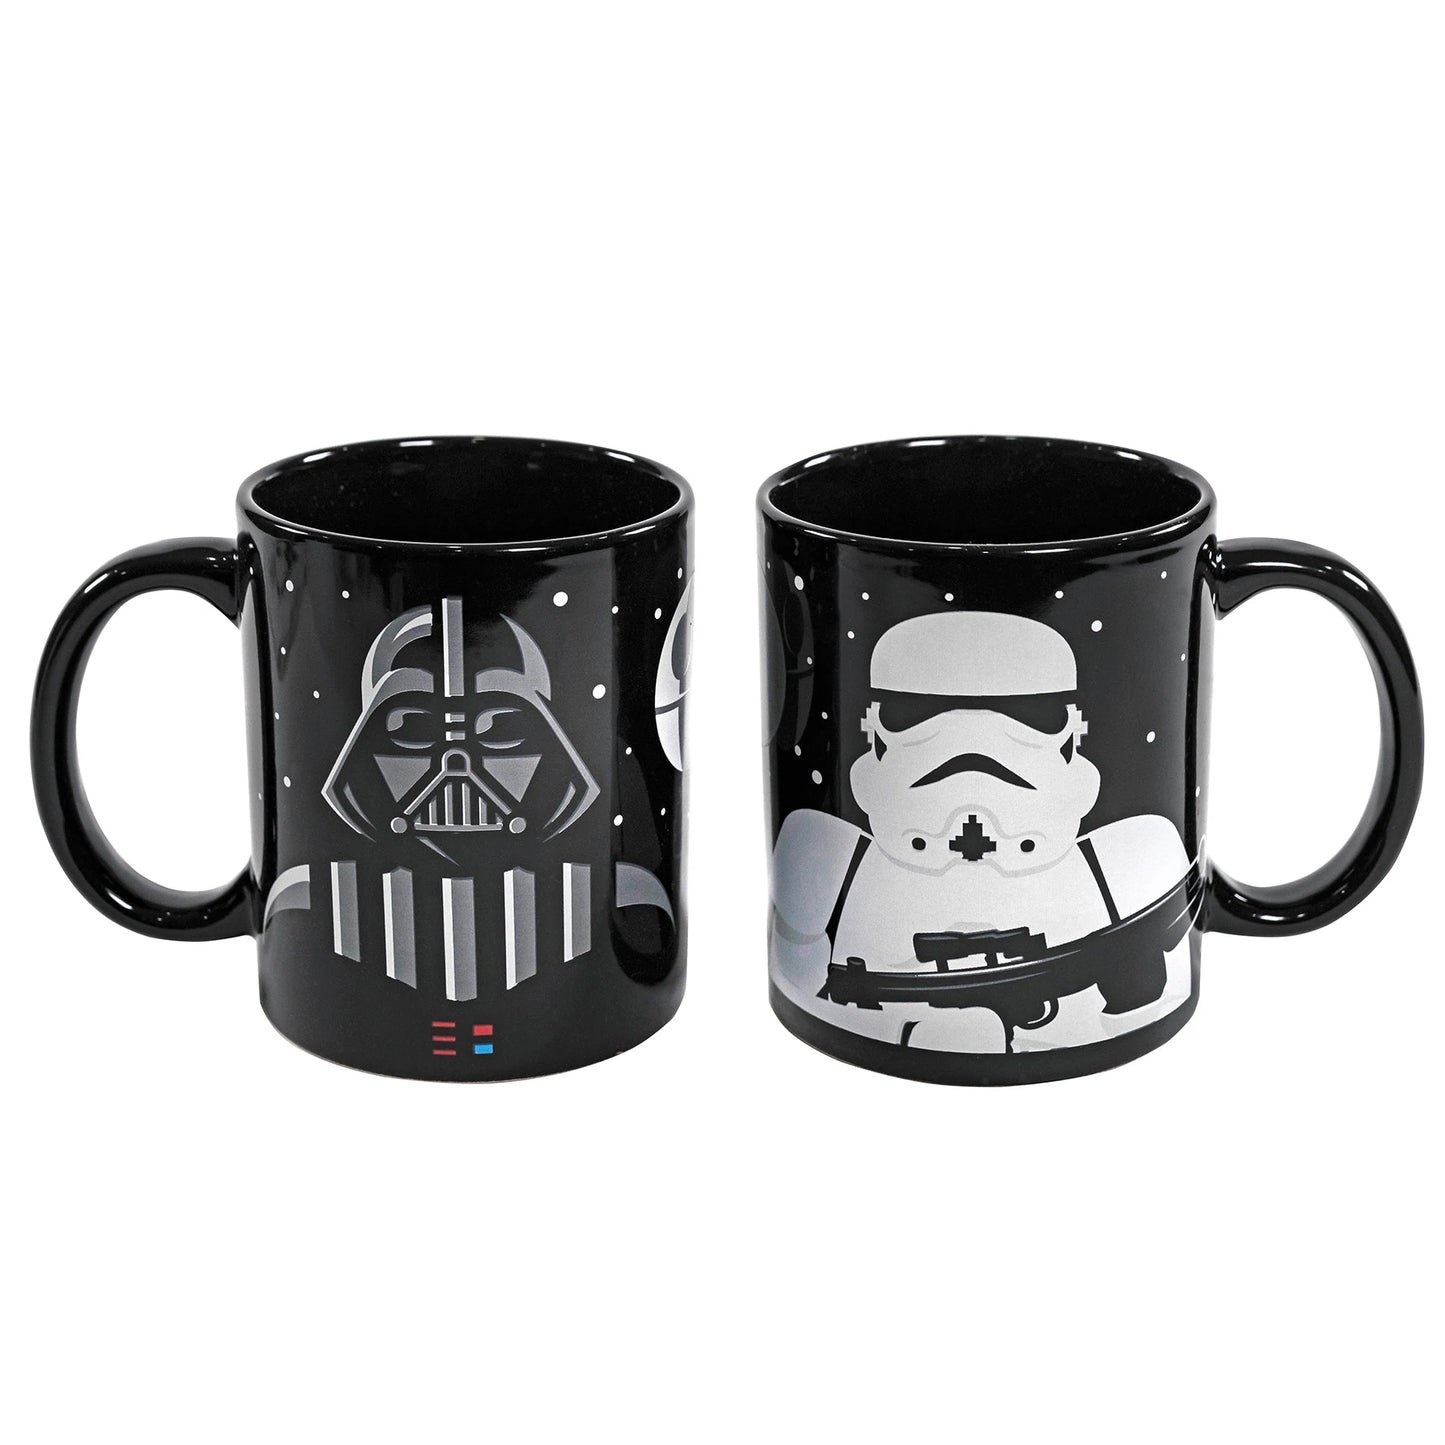 Darth Vader & Stormtrooper (Star Wars) Single Cup Coffee Maker Gift Set with Mugs